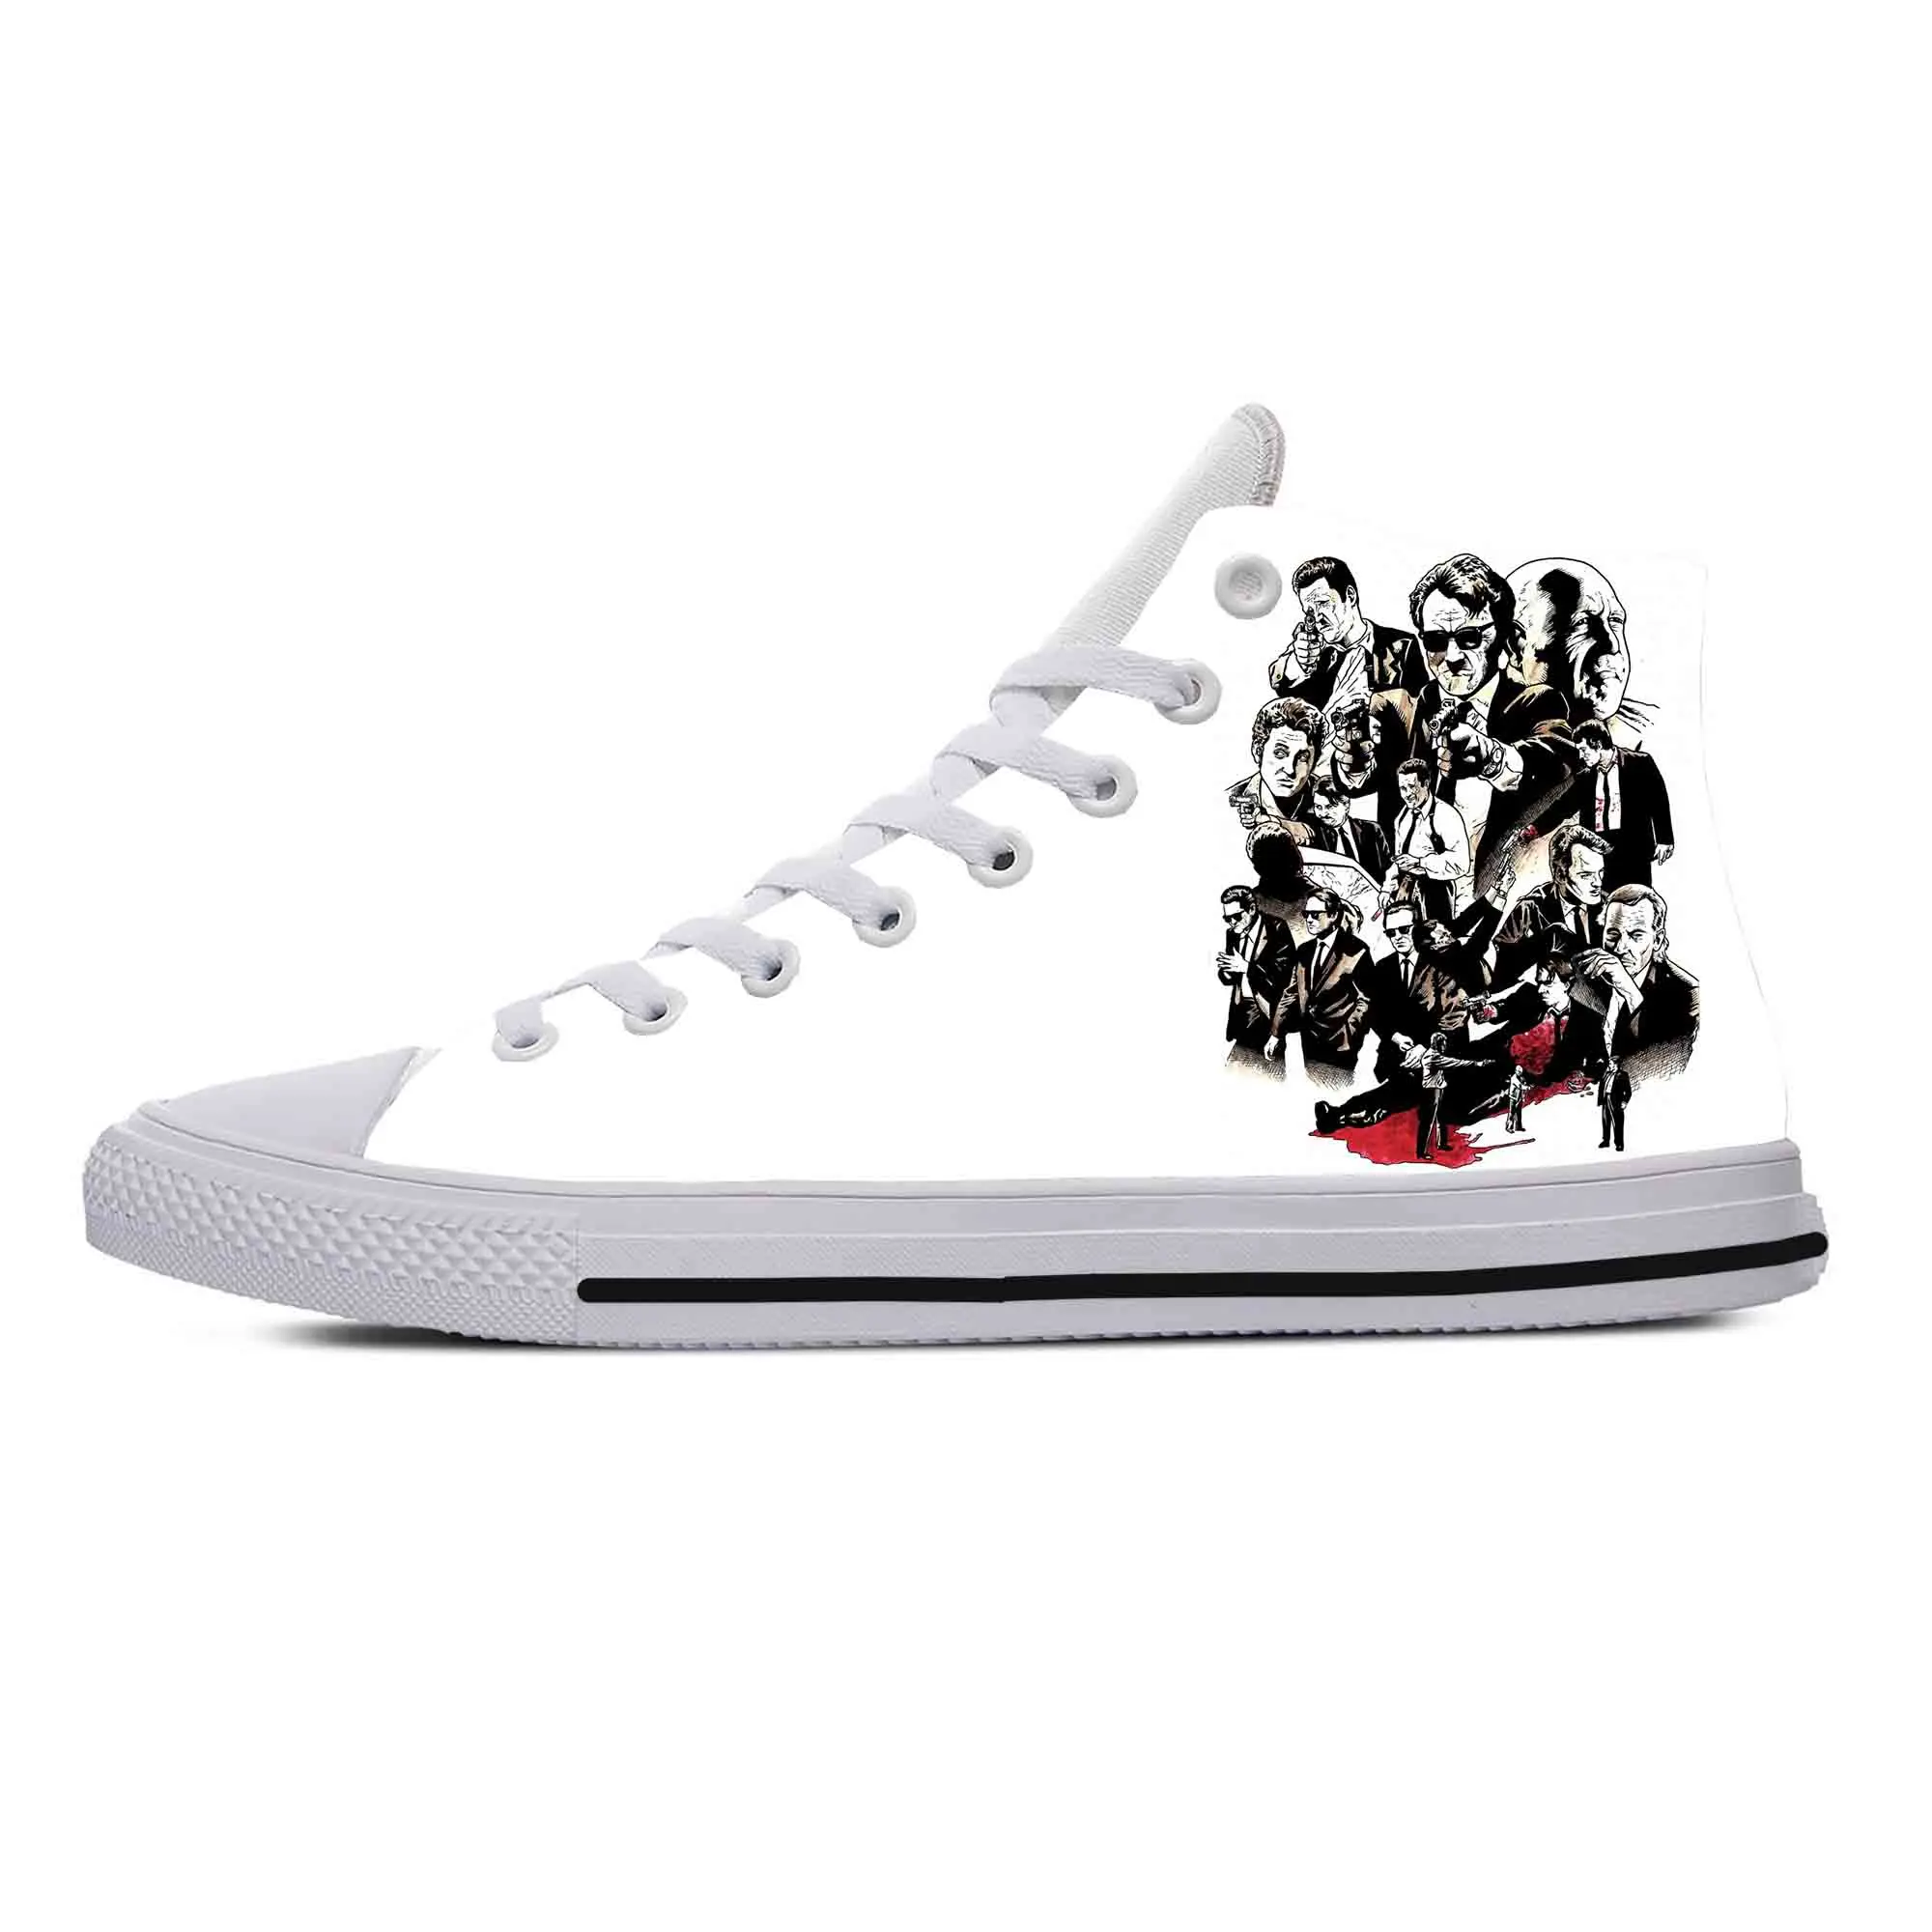 anime-cartoon-reservoir-dogs-quentin-tarantino-casual-cloth-shoes-high-top-lightweight-breathable-3d-print-men-women-sneakers